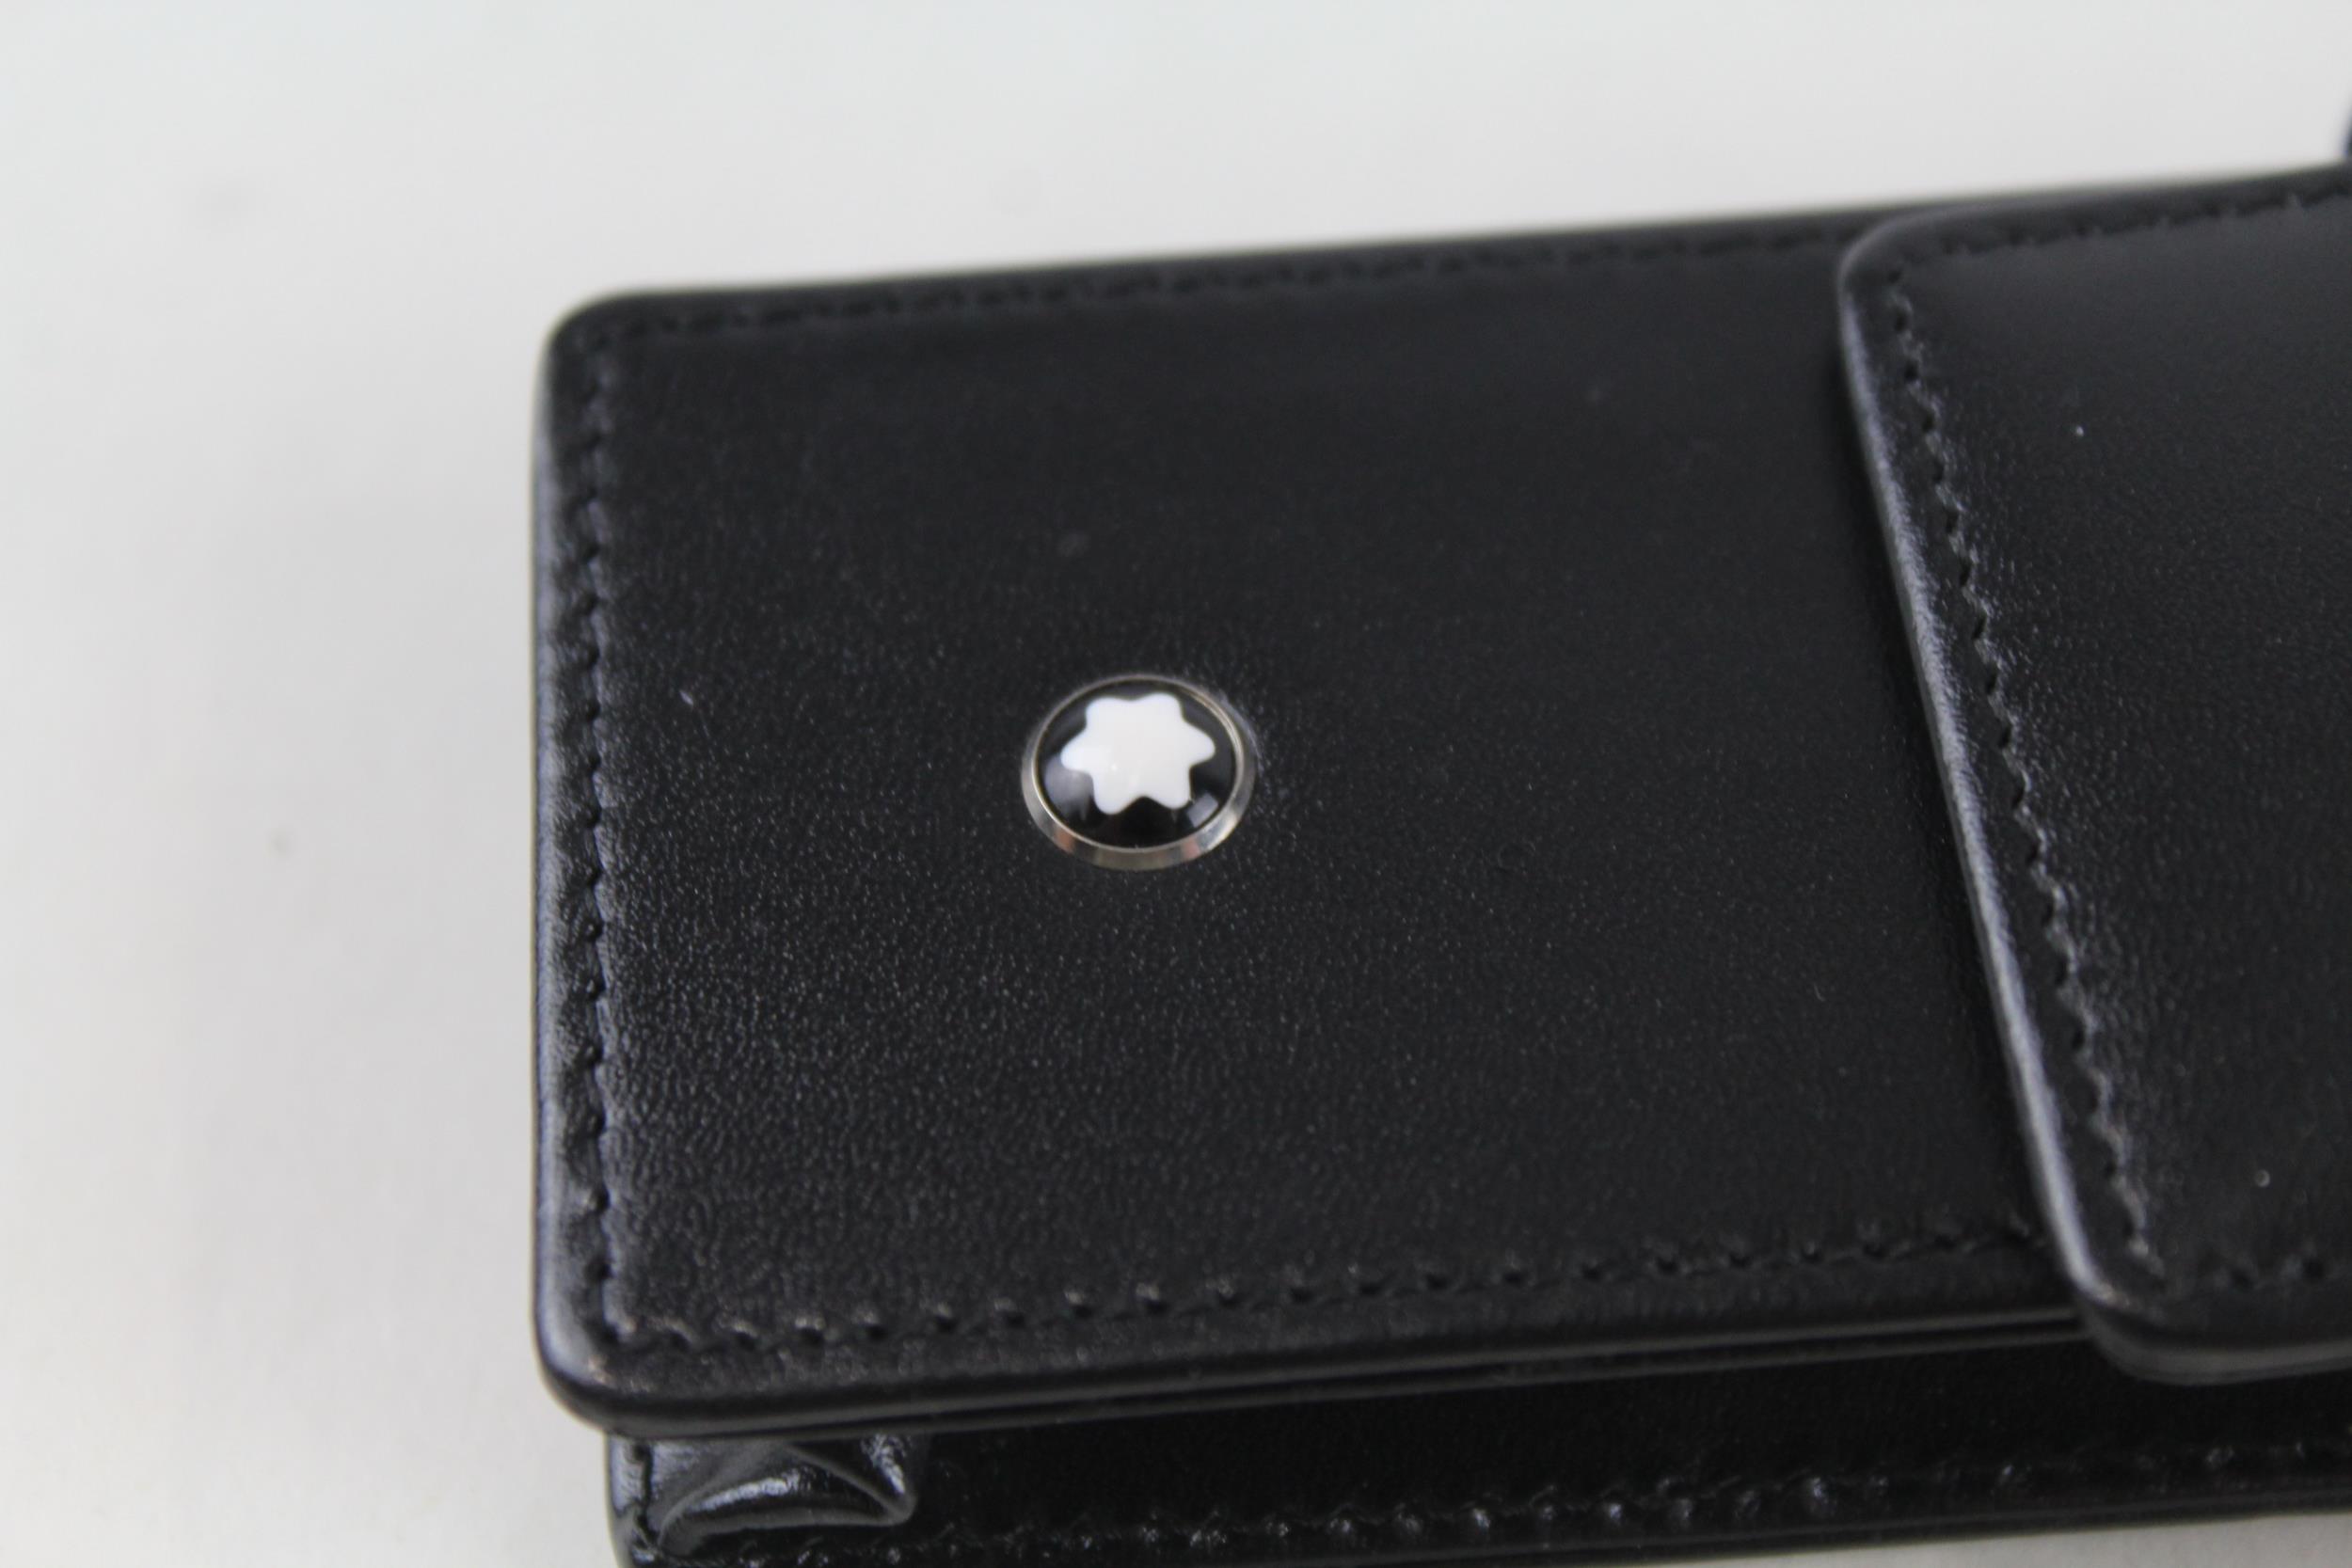 MONTBLANC Meisterstuck Black Leather 2 Compartment Pen Pouch - Dimensions - 4.5cm(w) x 17cm(h) In - Image 2 of 5